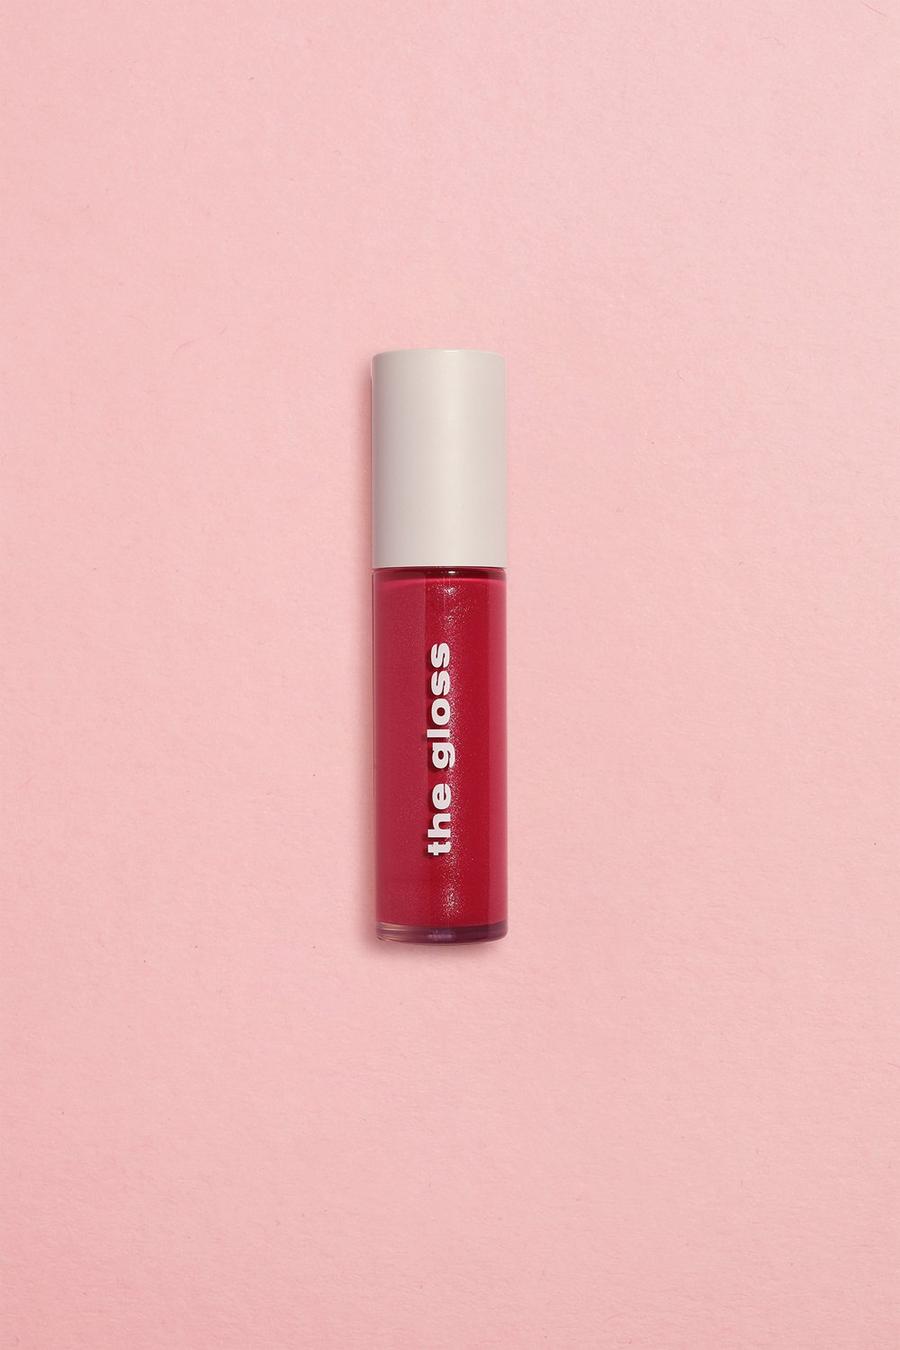 Boohoo Beauty - Le gloss - Rouge, Red rouge